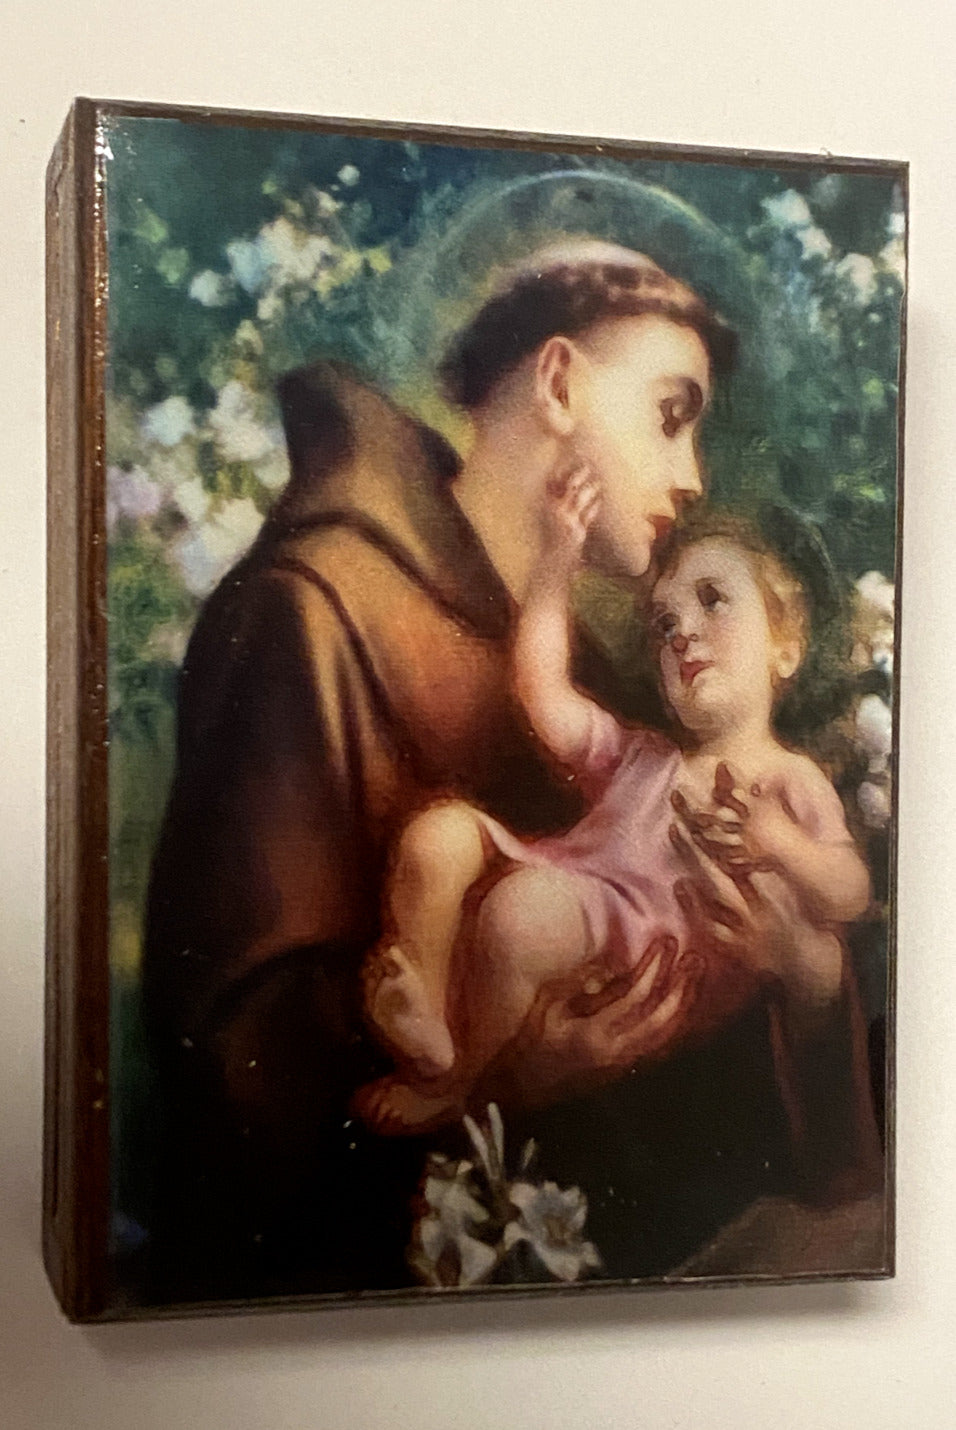 Saint Anthony of Padua Wood Rosary Box with Rosary, New from Colombia - Bob and Penny Lord